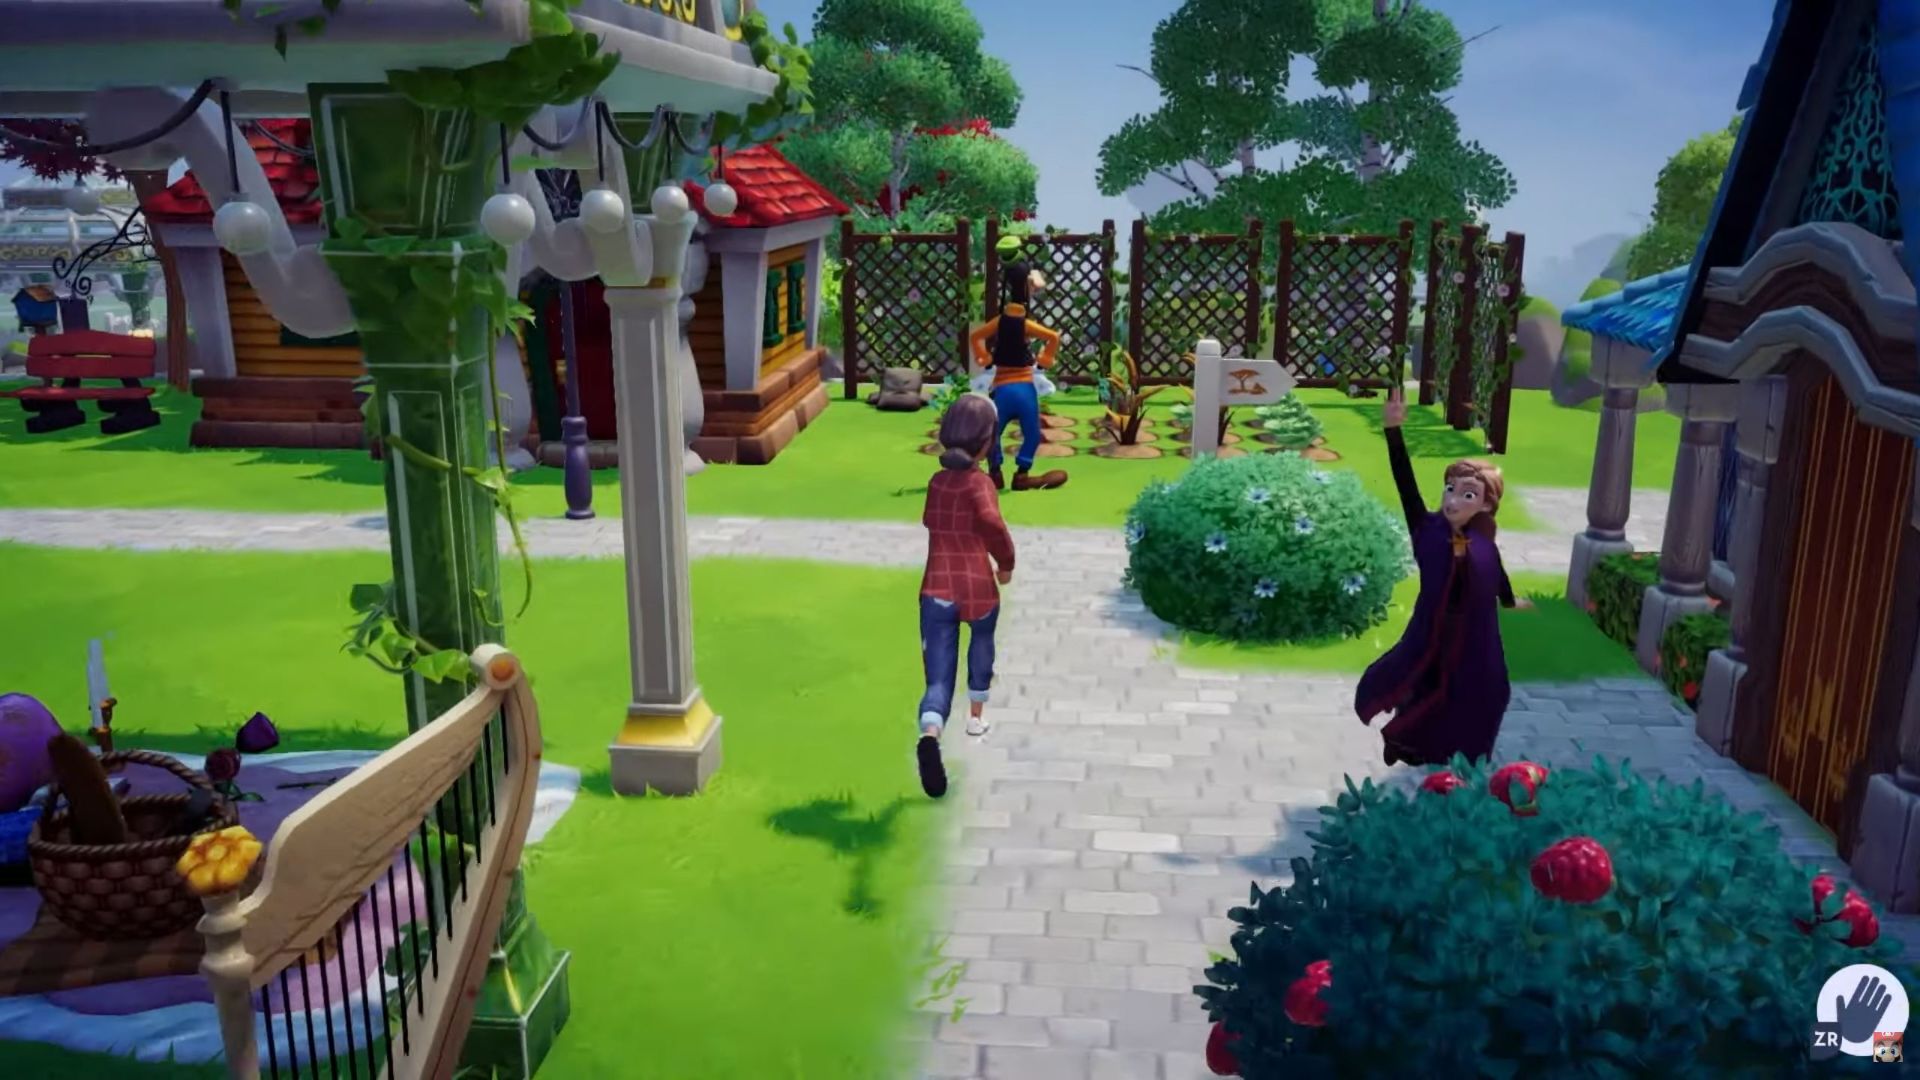 The player character exploring in Disney Dreamlight Valley in today's Nintendo Direct Mini